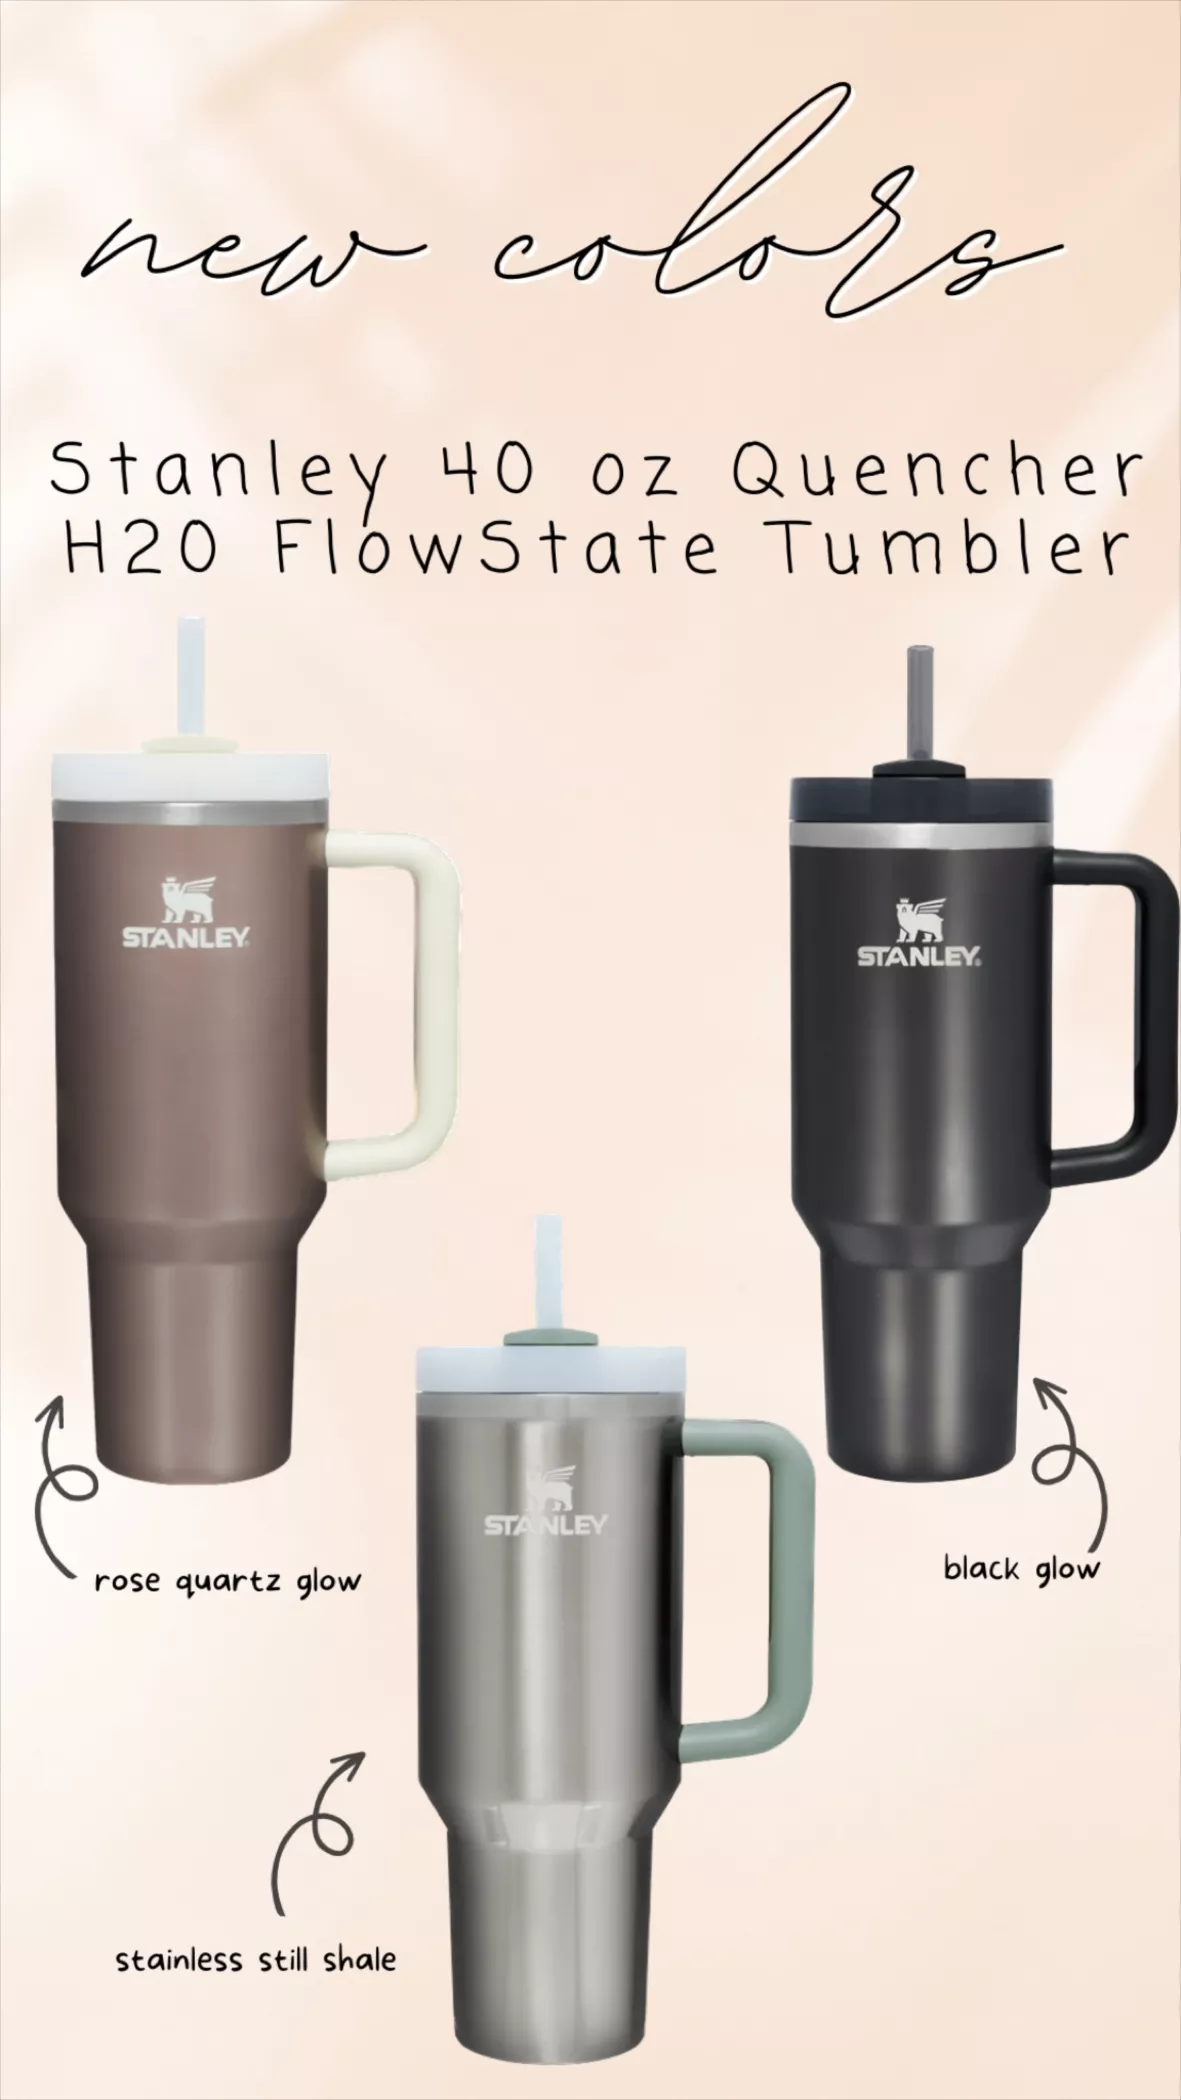 Just Released Stanley Rose Quartz Glow 40oz Quencher H2.0 FlowState Tumbler